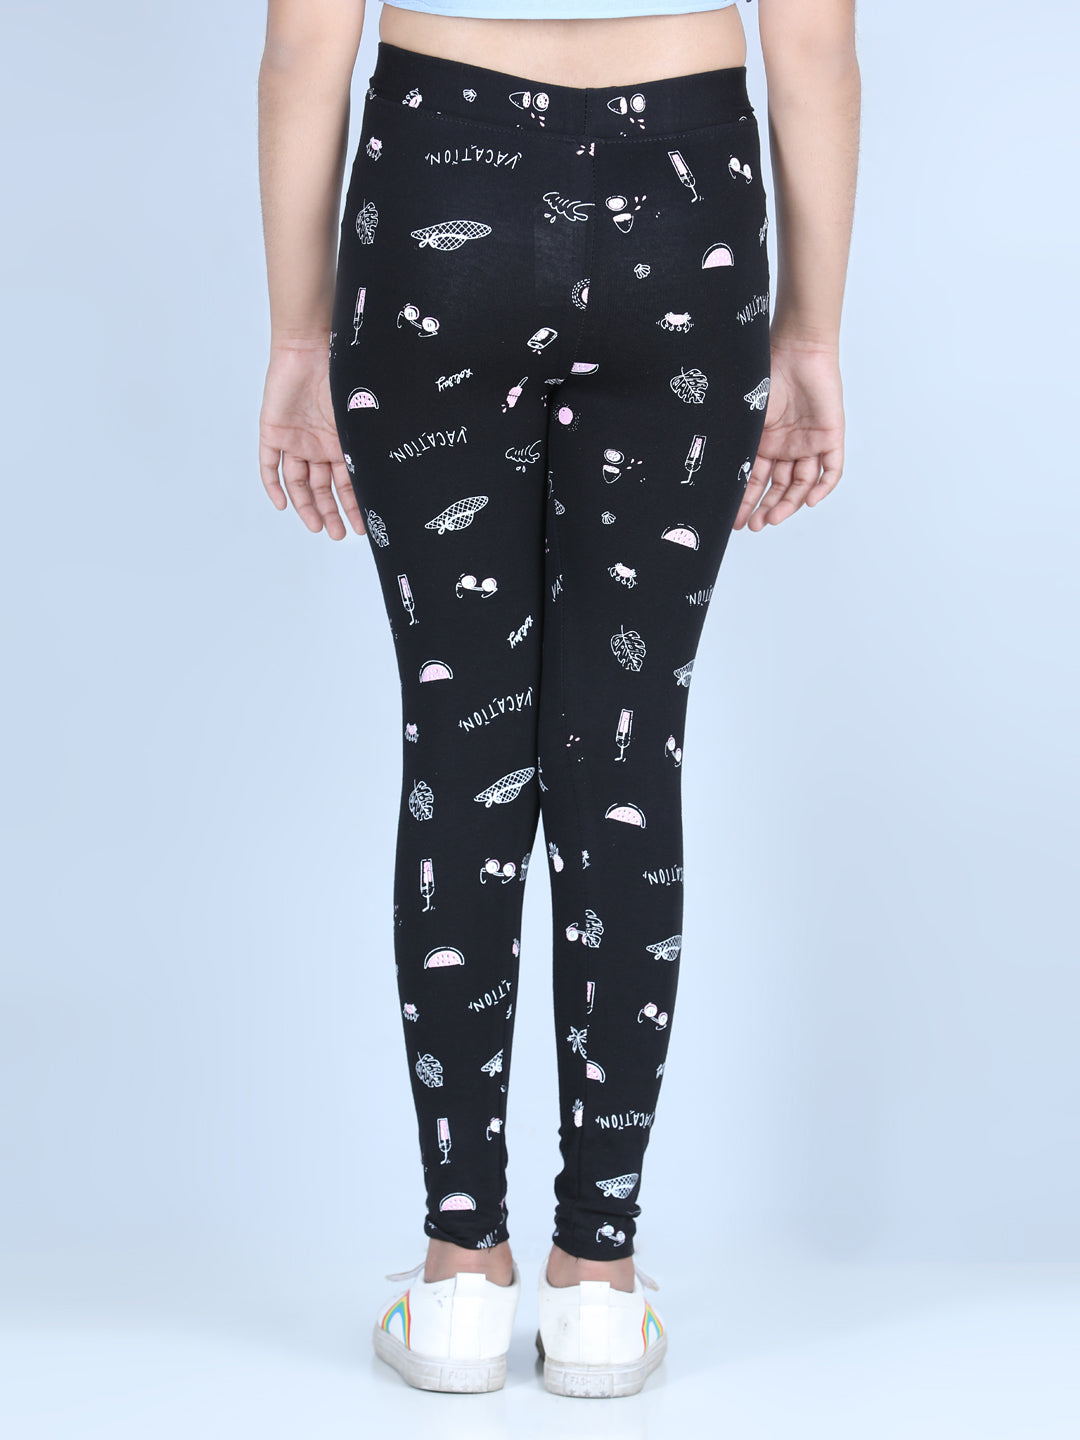 Girls Holiday Inspired Printed Leggings with Flat Waistband- Black